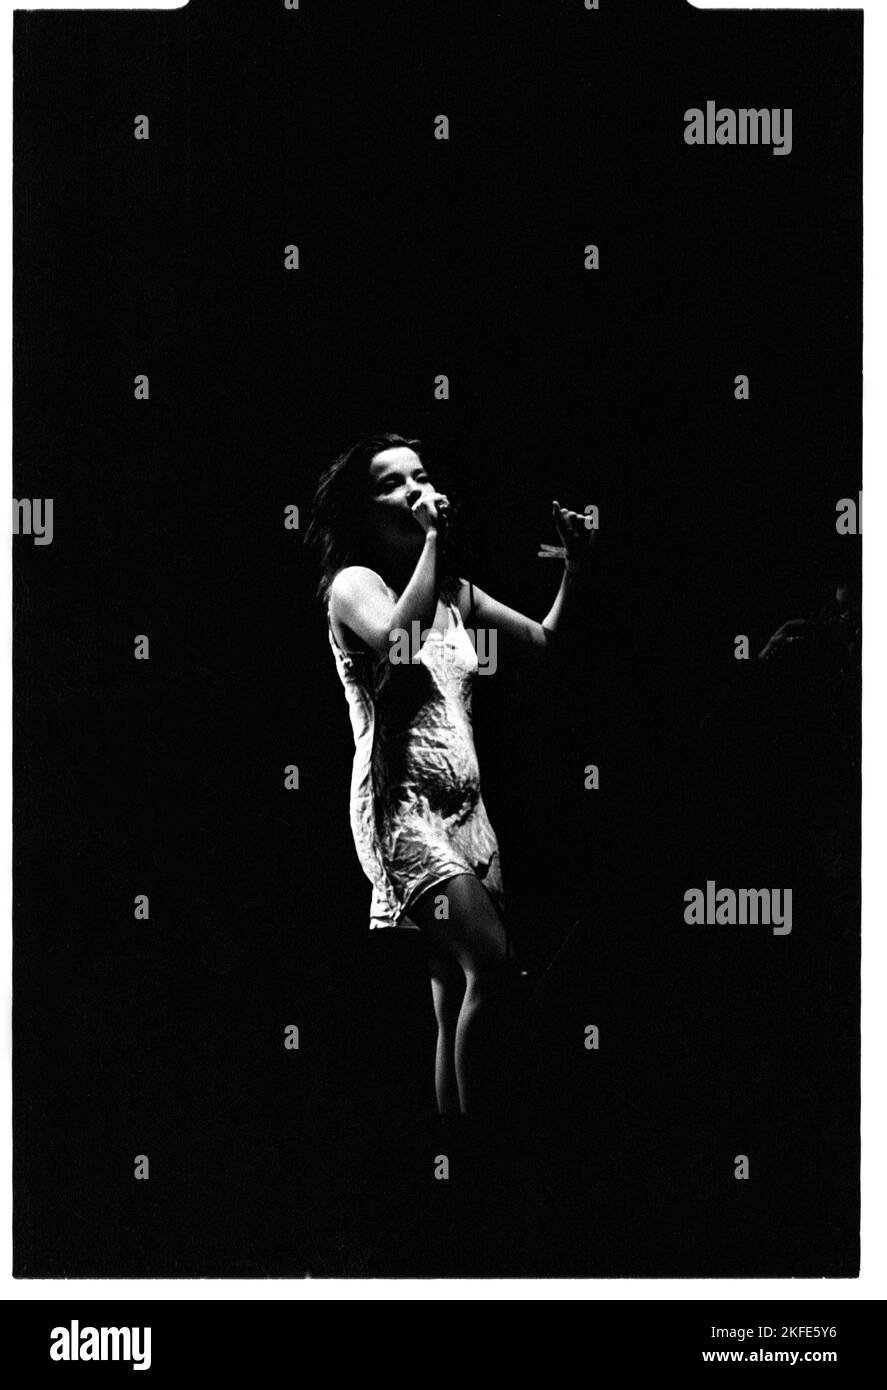 BJÖRK, NME STAGE HEADLINE, GLASTONBURY 94: Björk (Bjork) at the Glastonbury Festival on June 25 1994 as headliner on the NME Stage, Pilton Farm, England. Photograph: Rob Watkins.  INFO: Björk is an Icelandic singer, songwriter, and actress known for her eclectic and innovative music. Emerging as the lead singer of The Sugarcubes, she achieved global fame with her solo career, producing acclaimed albums like 'Debut,' 'Homogenic,' and 'Vespertine.' Stock Photo